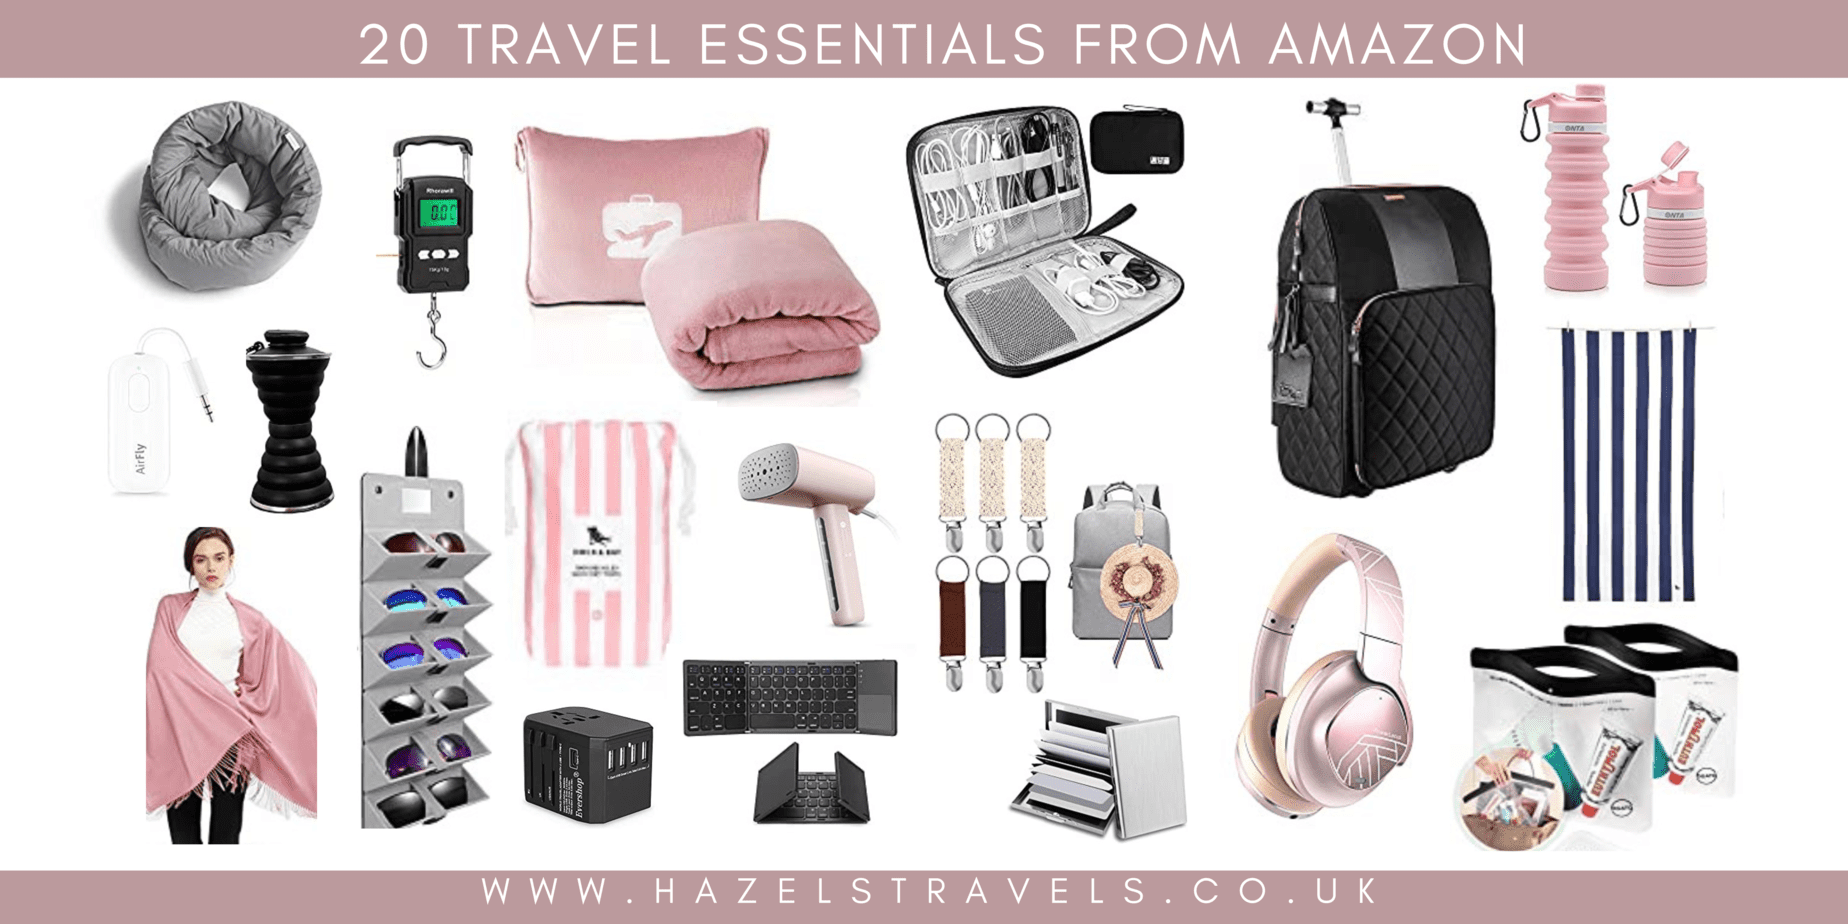 20 of the Best Travel Essentials From Amazon